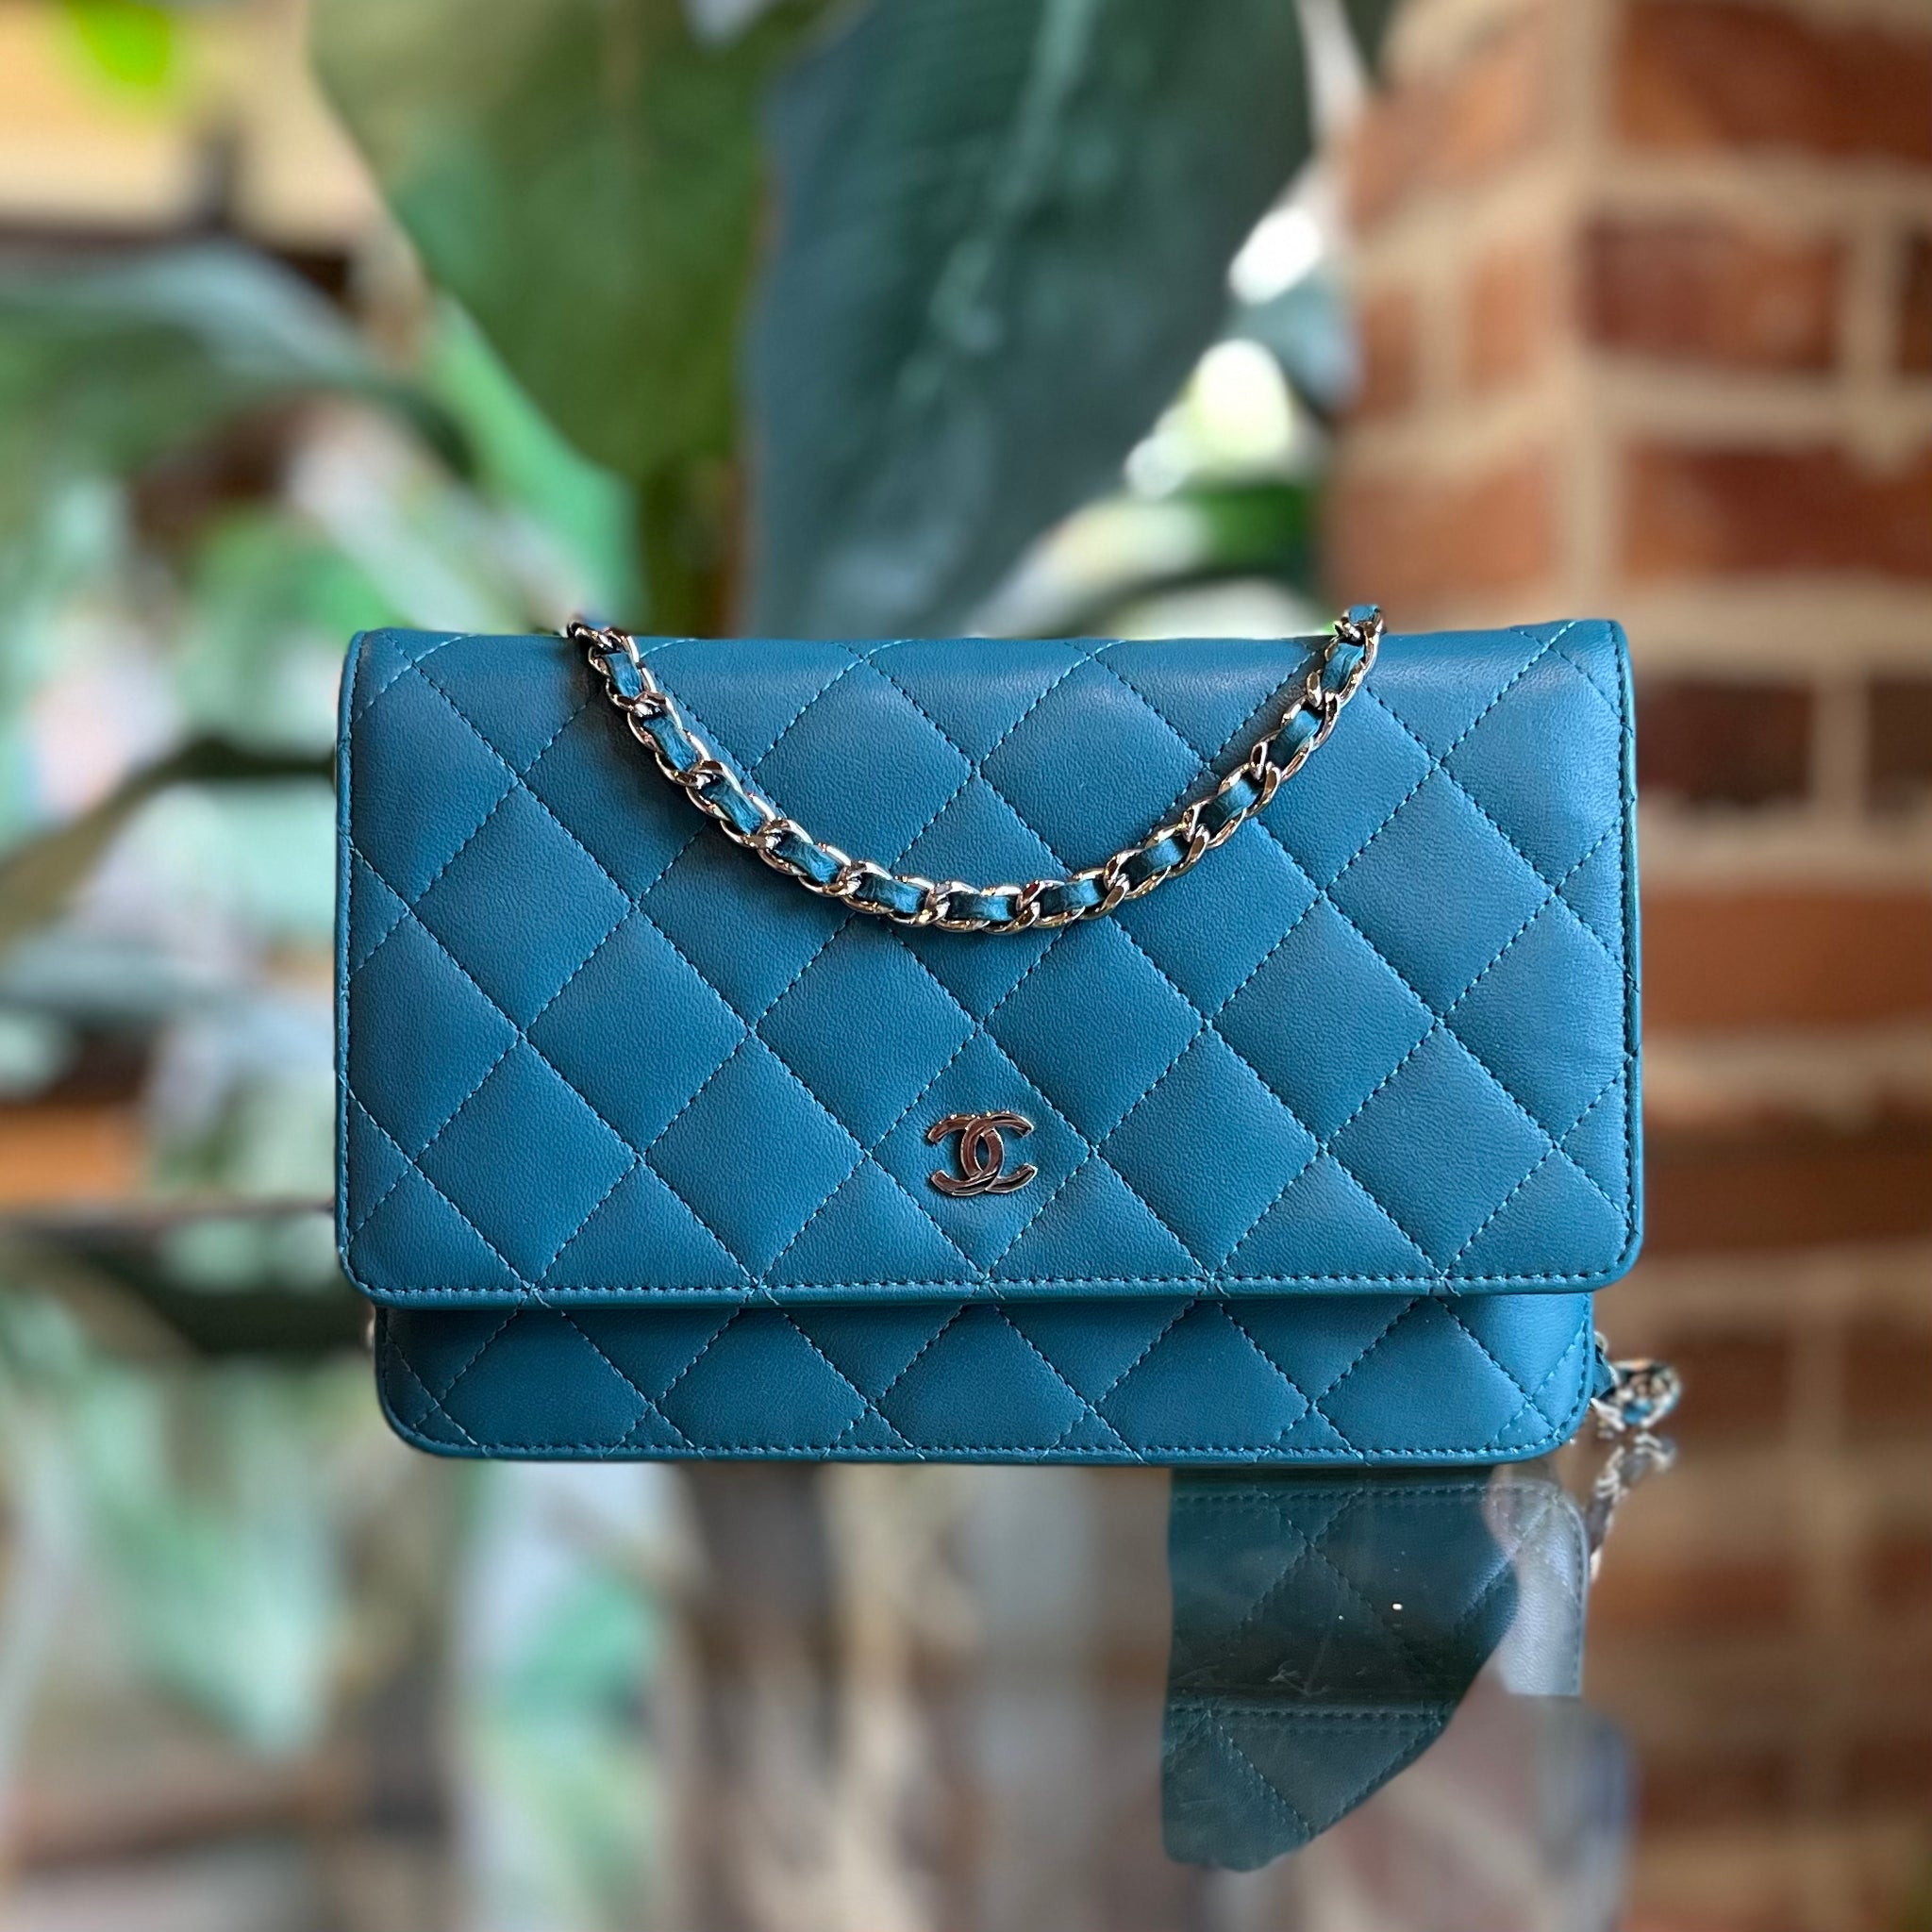 Chanel Teal Quilted Calfskin Leather Wallet on Chain